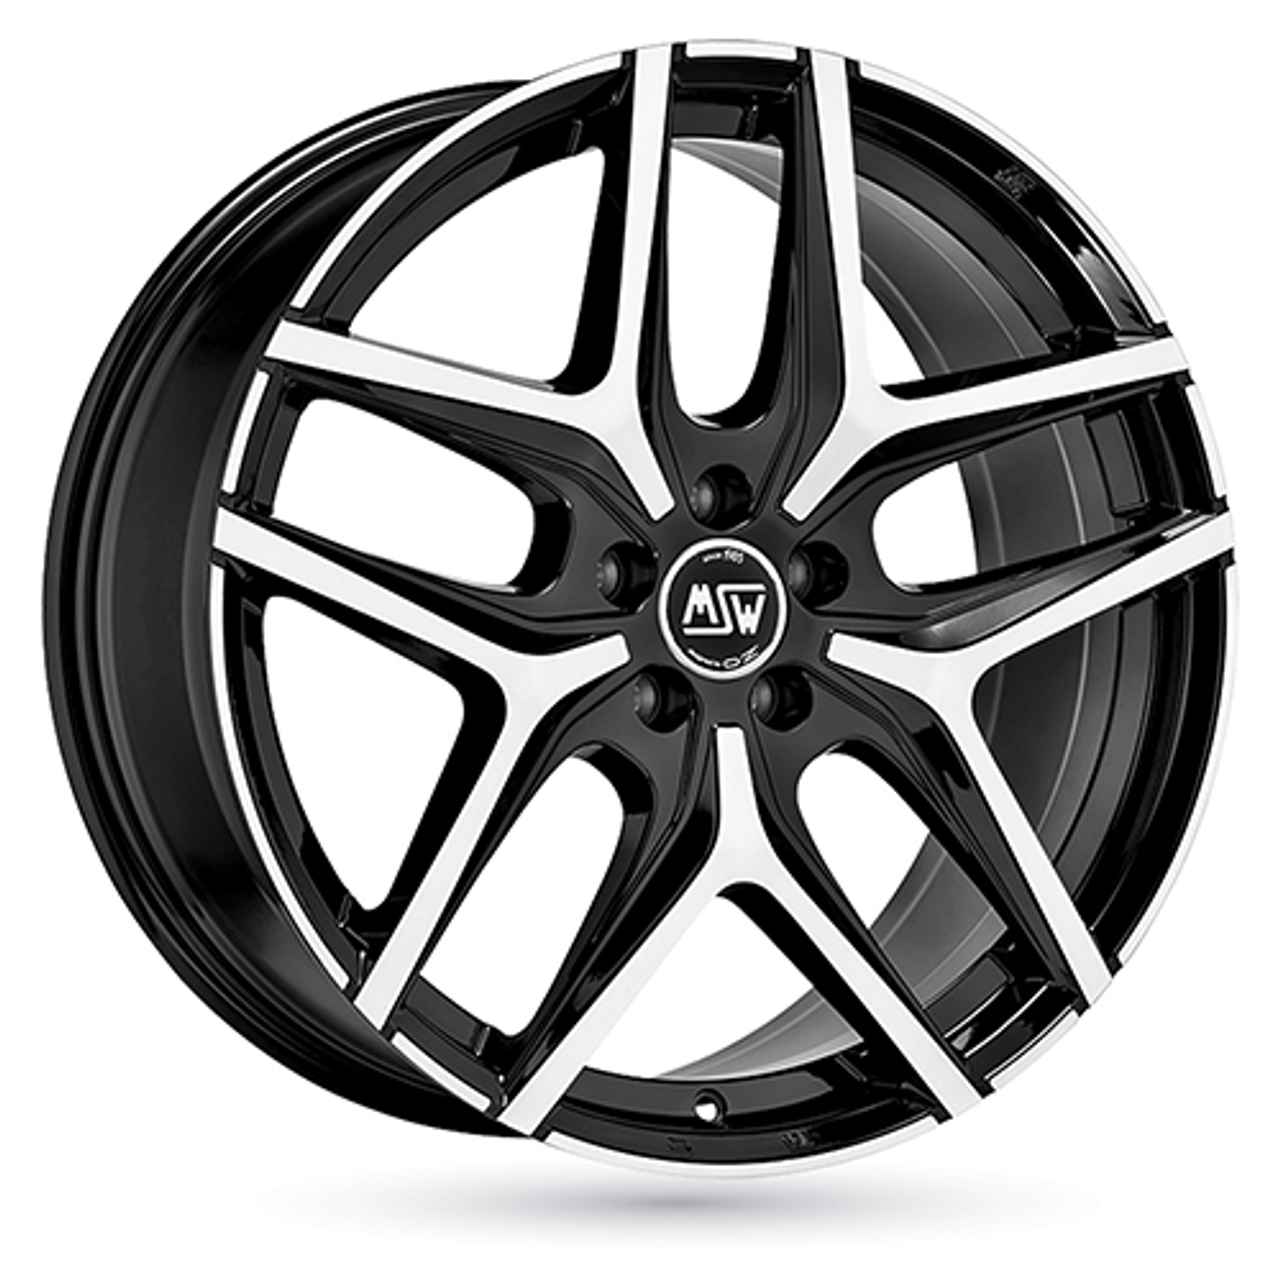 MSW (OZ) MSW 40 gloss black full polished 8.0Jx18 5x108 ET42